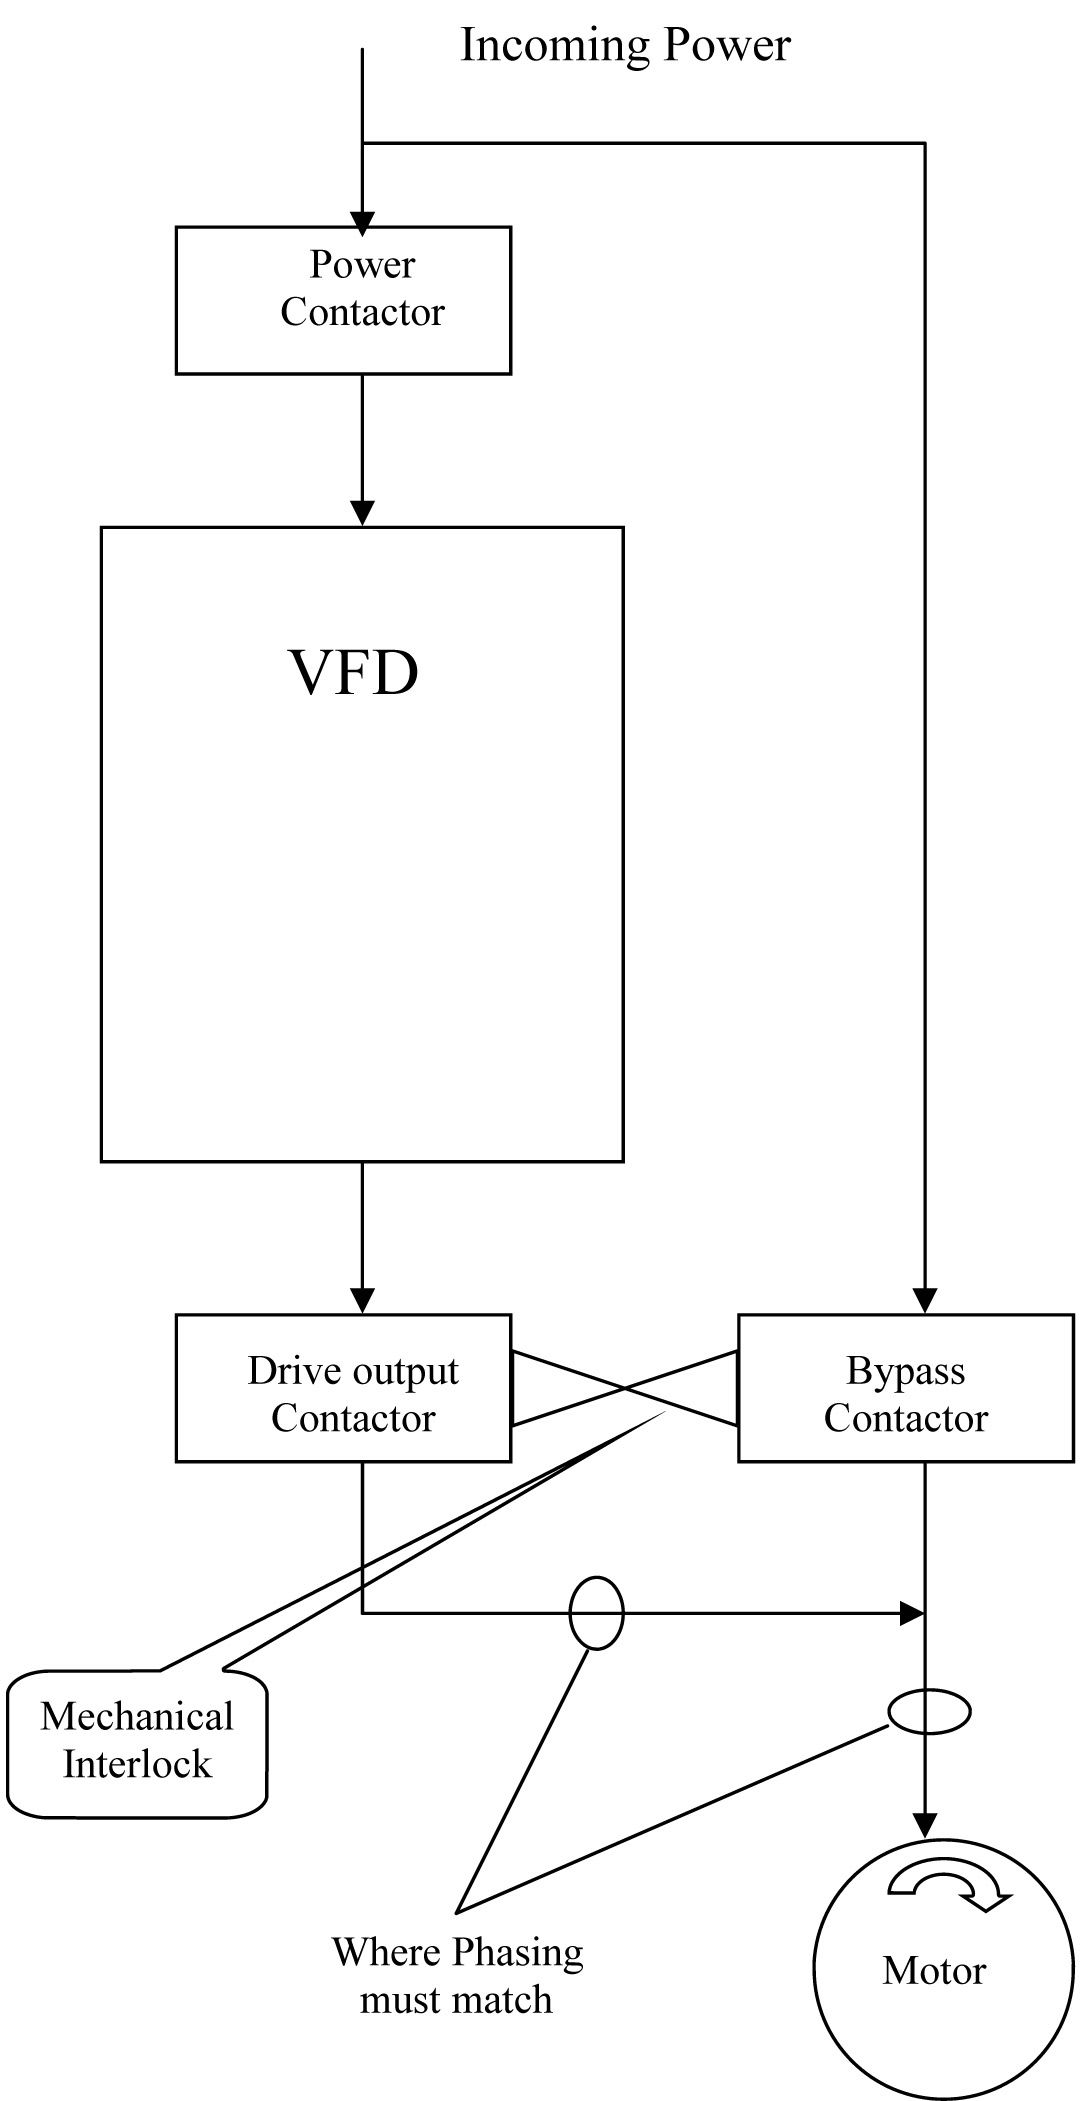 Proper Phasing Of A Vfd With Bypass